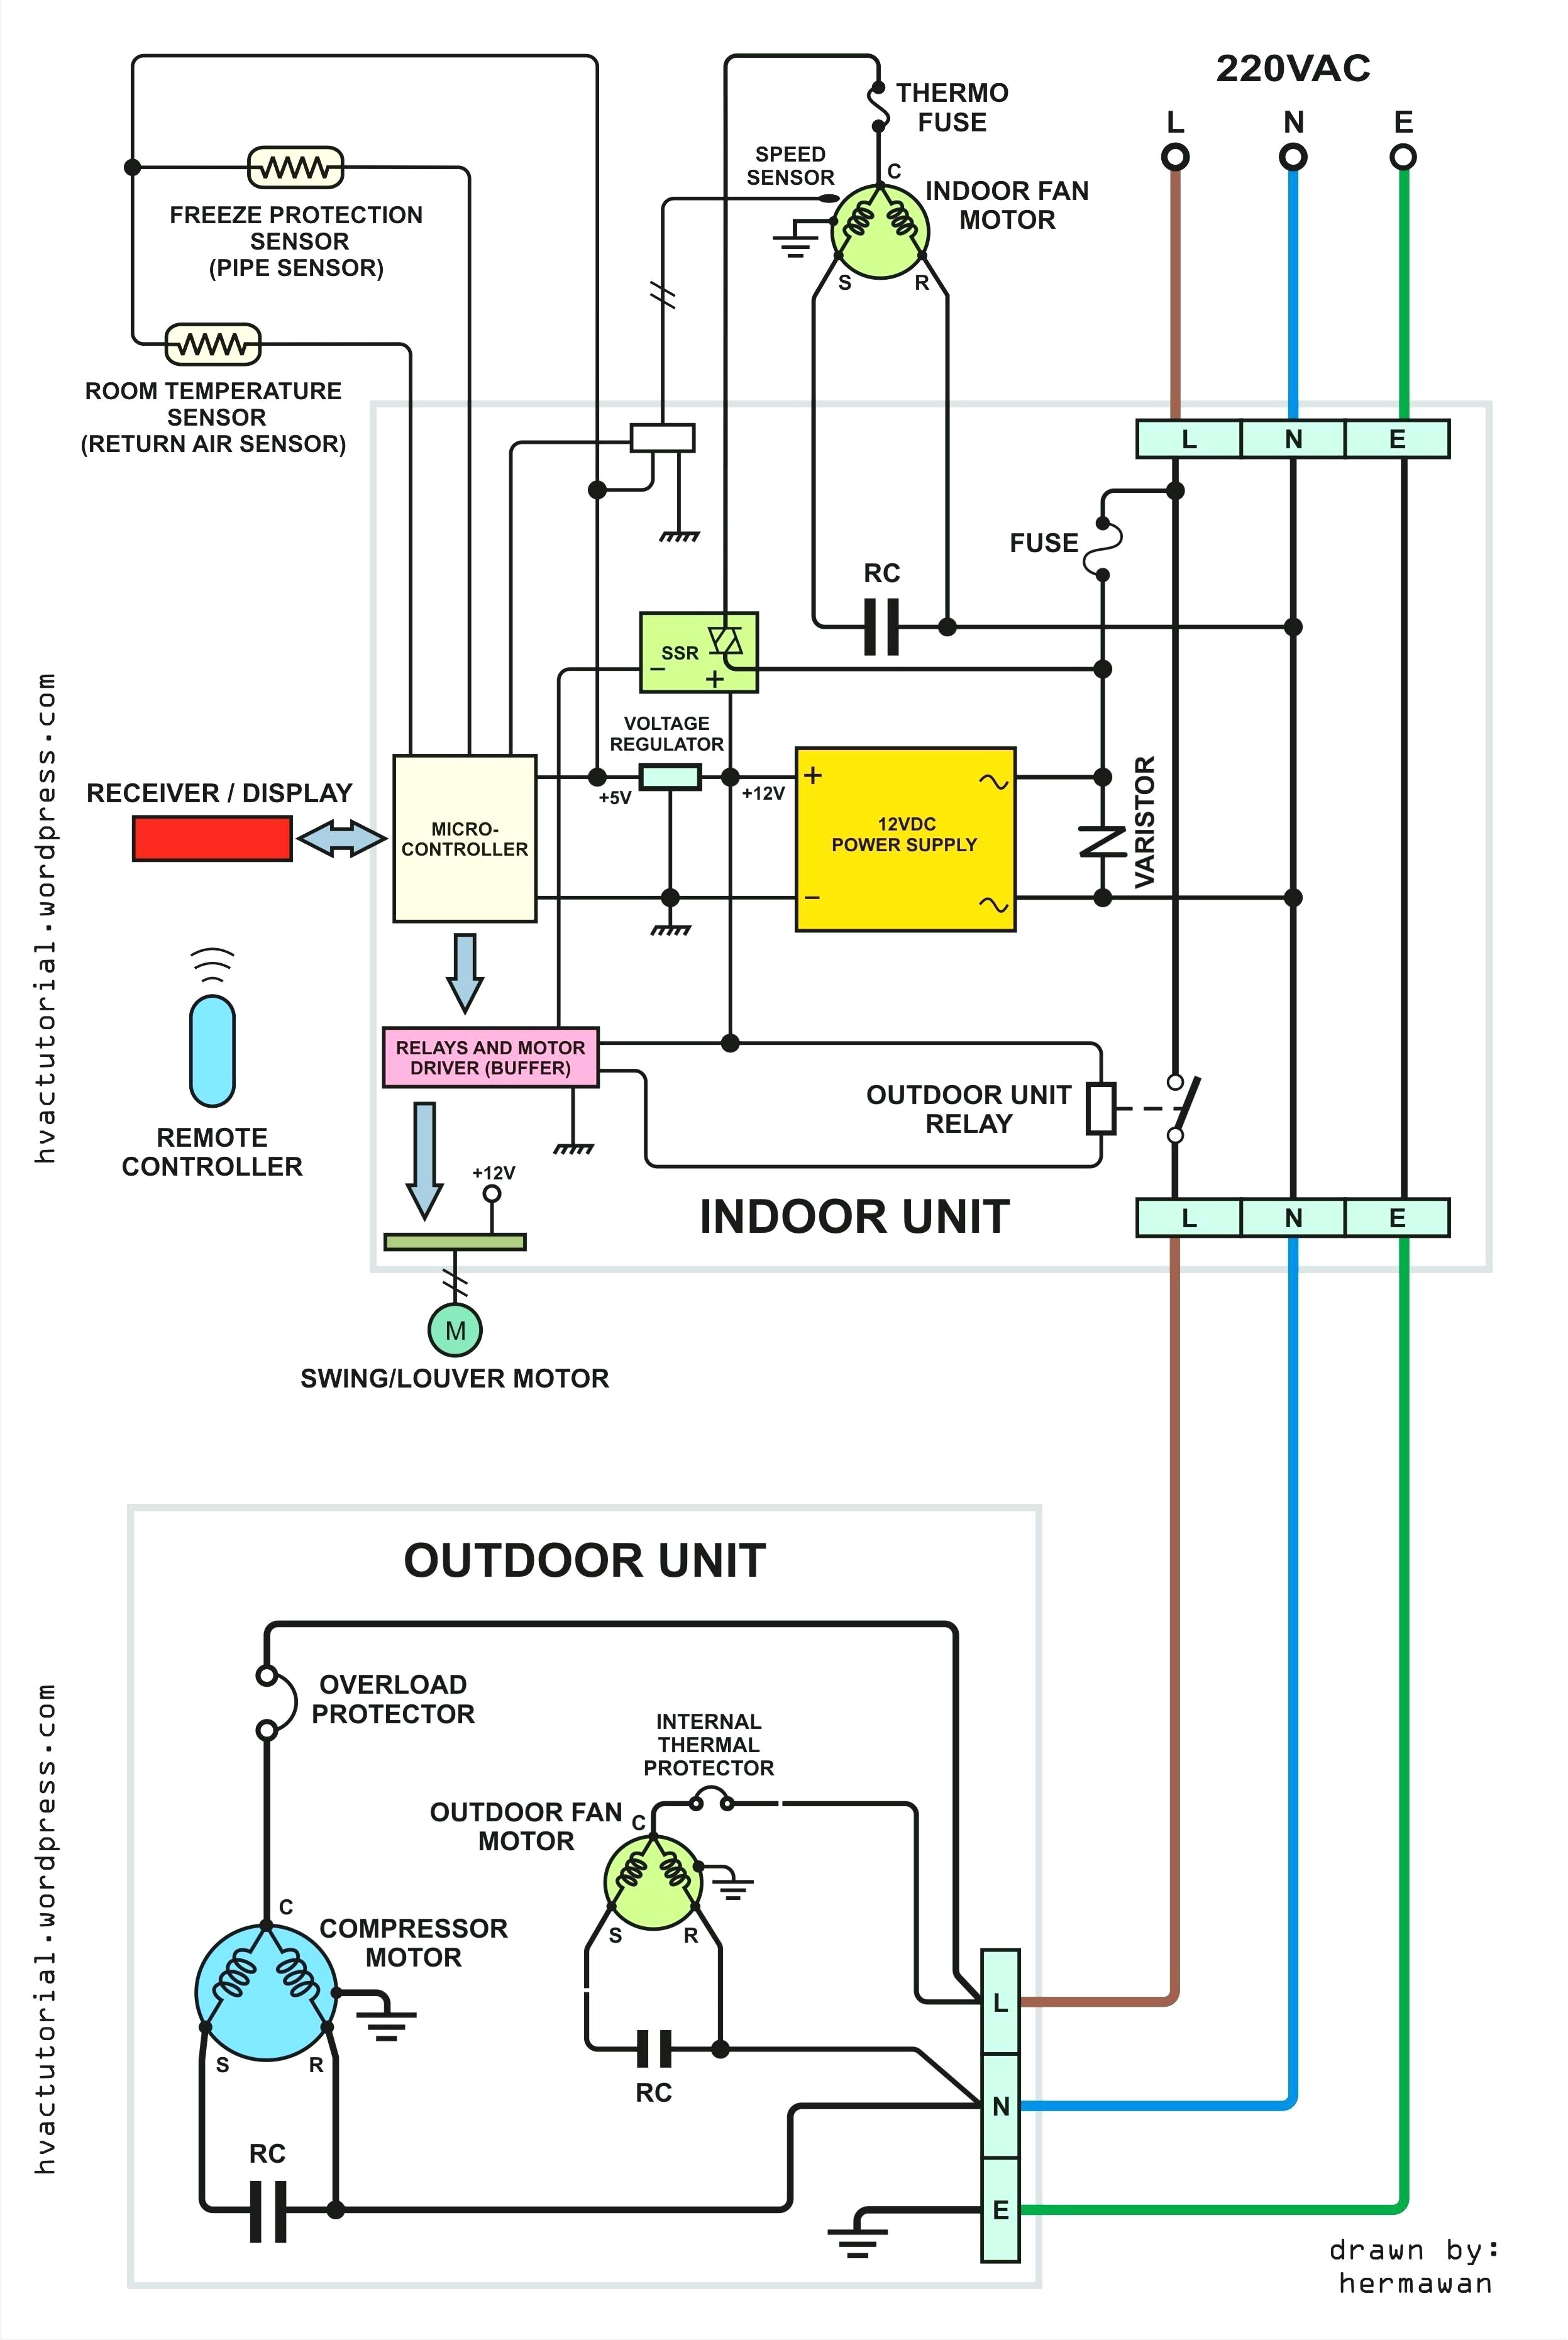 diagrams schematic wiring wiring diagram load schematic diagrams break the wiring of control systems down into